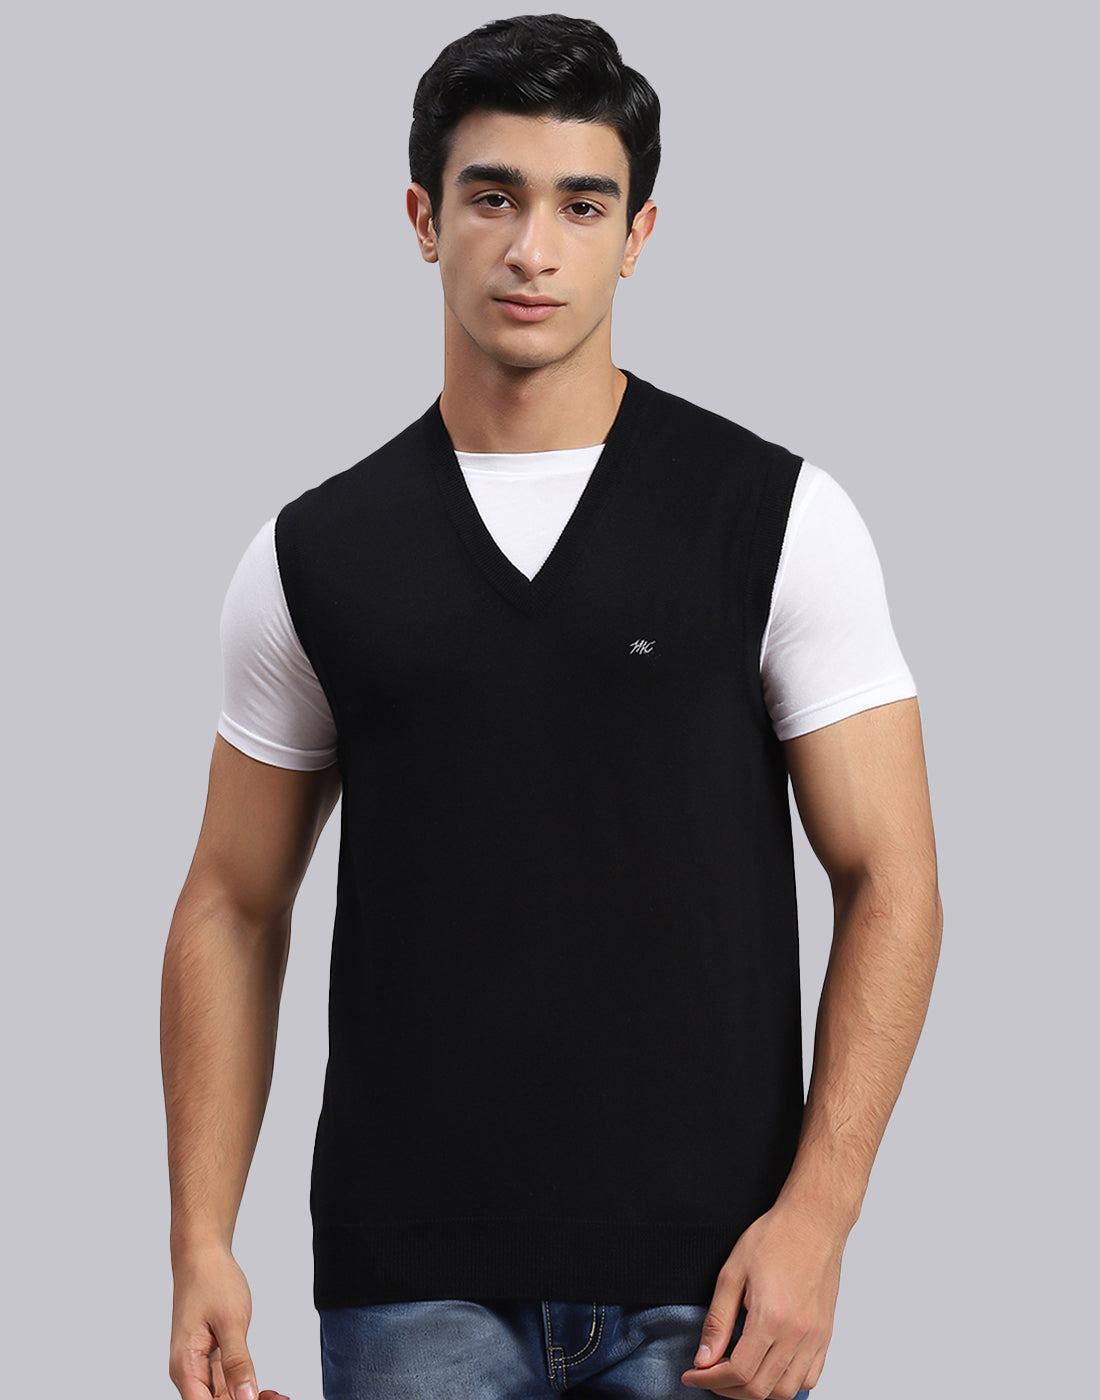 Men Black Solid V Neck Sleeveless Sweaters/Pullovers